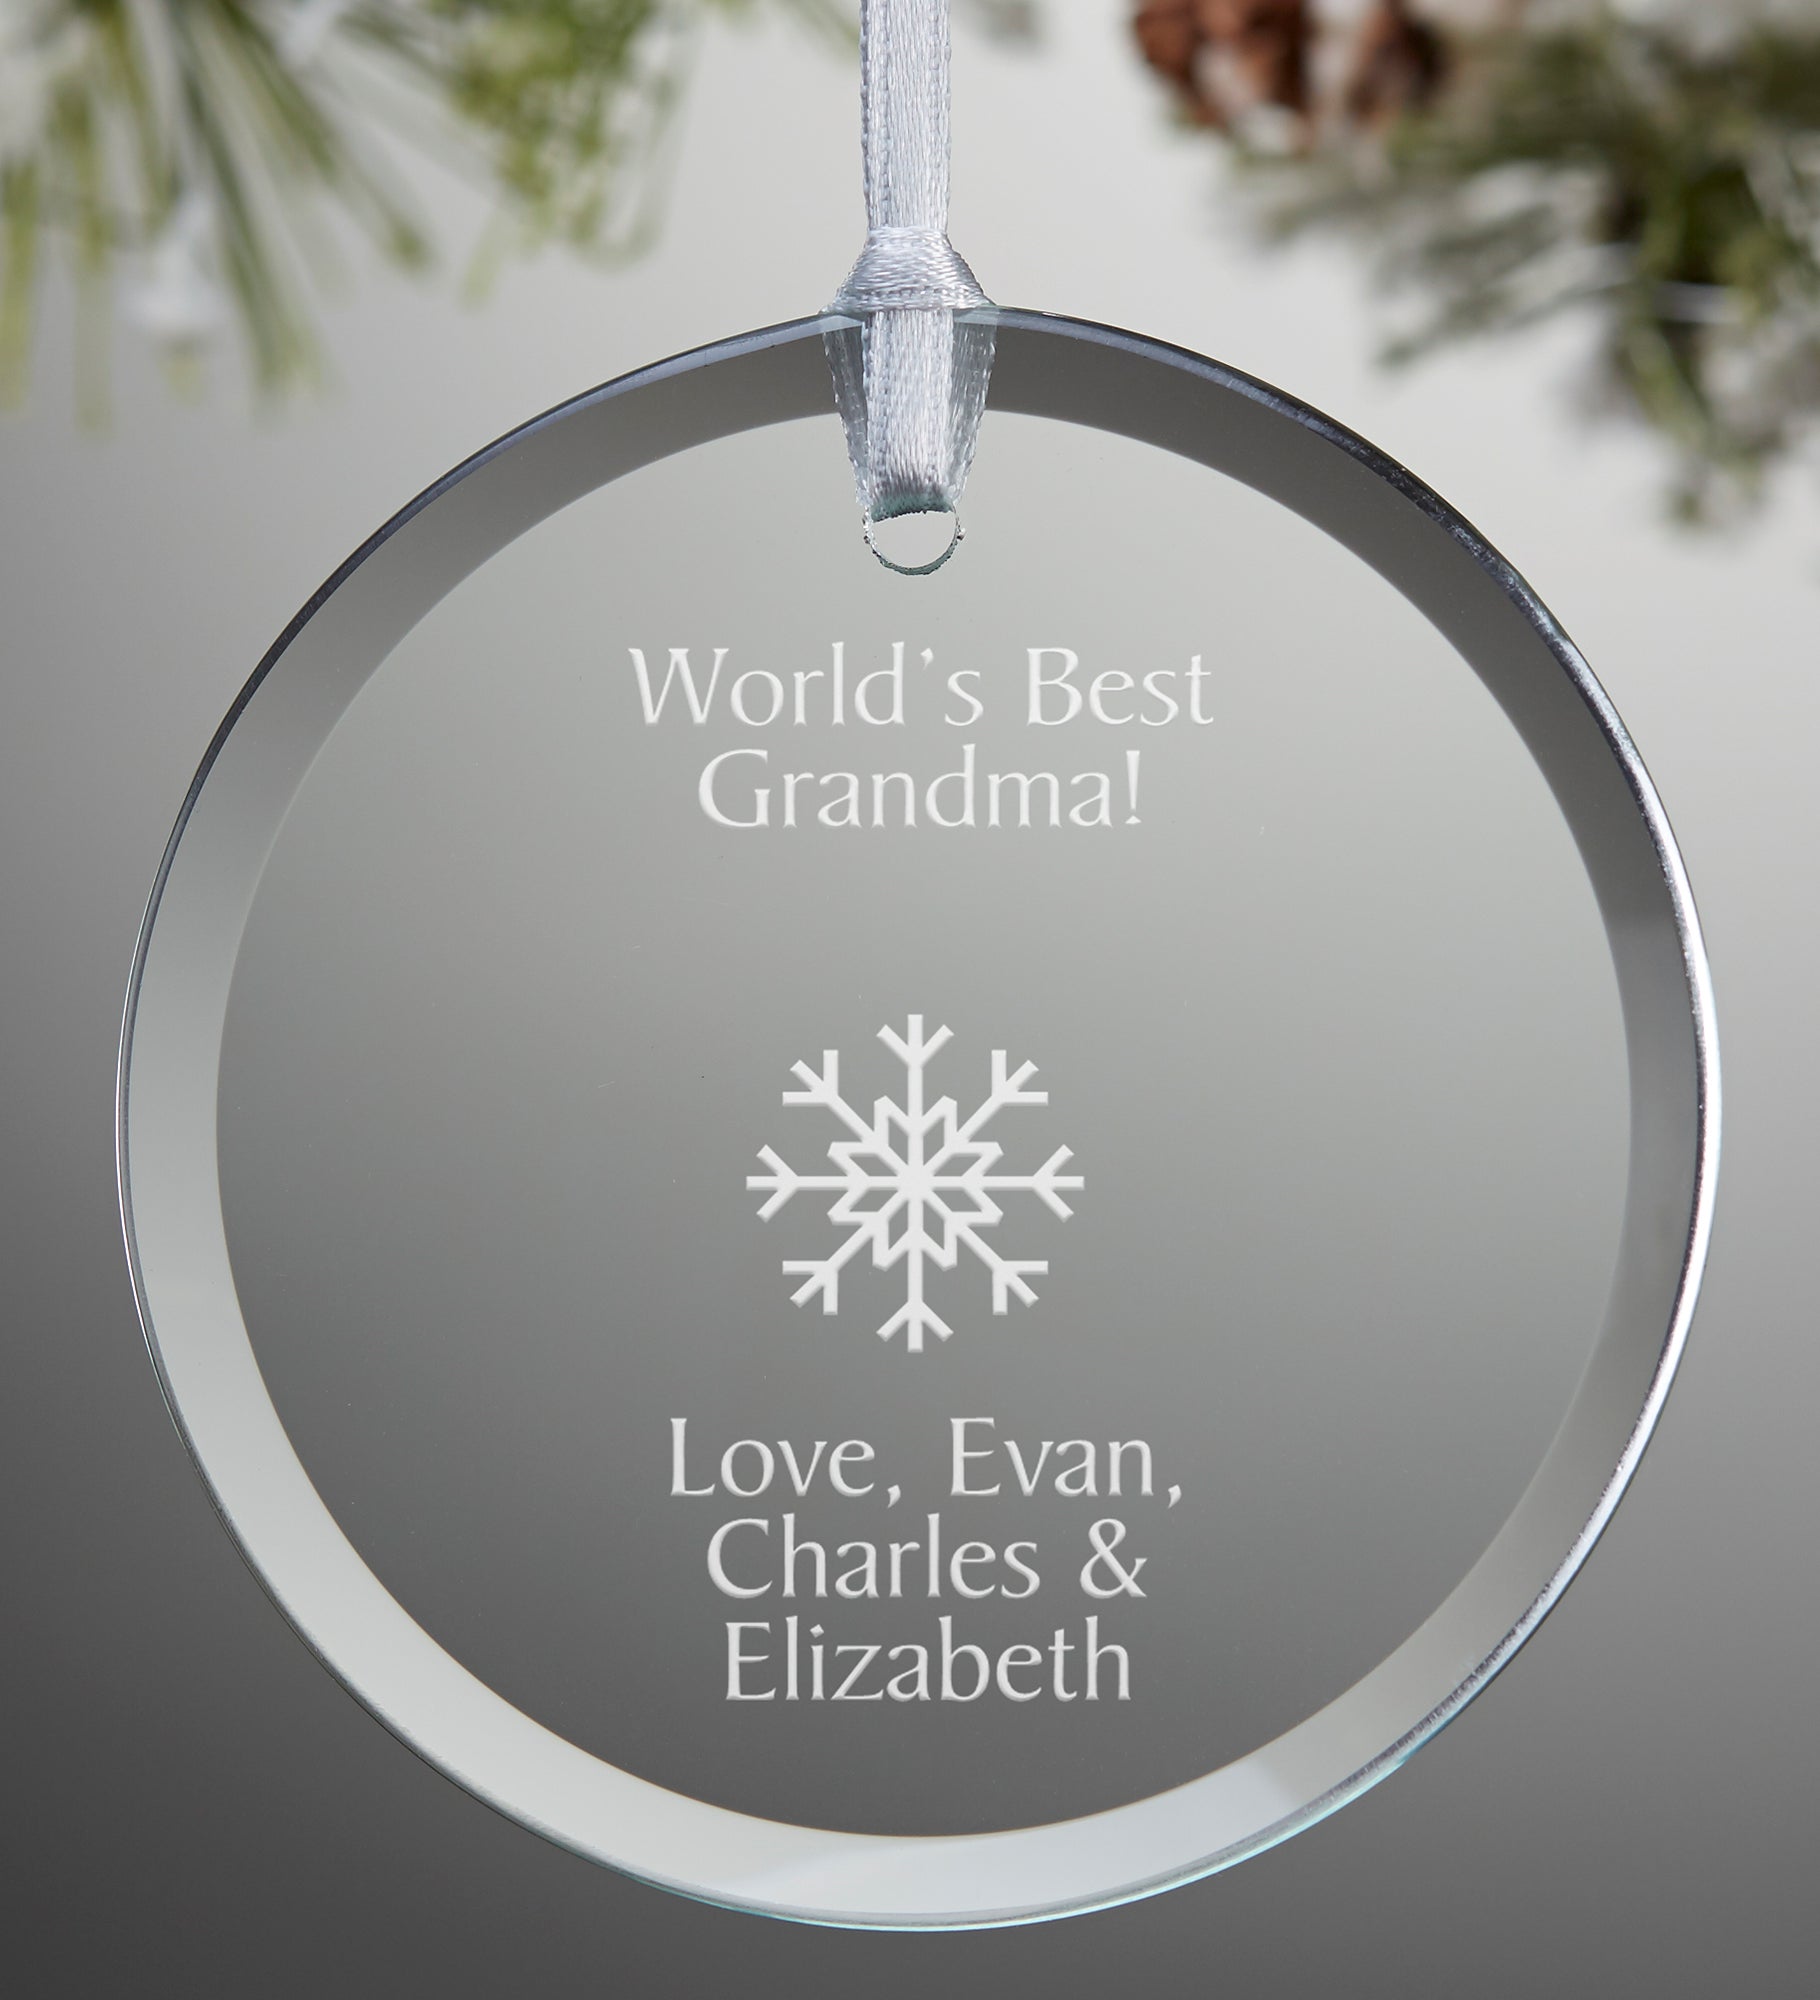 Create Your Own Round Personalized Ornament